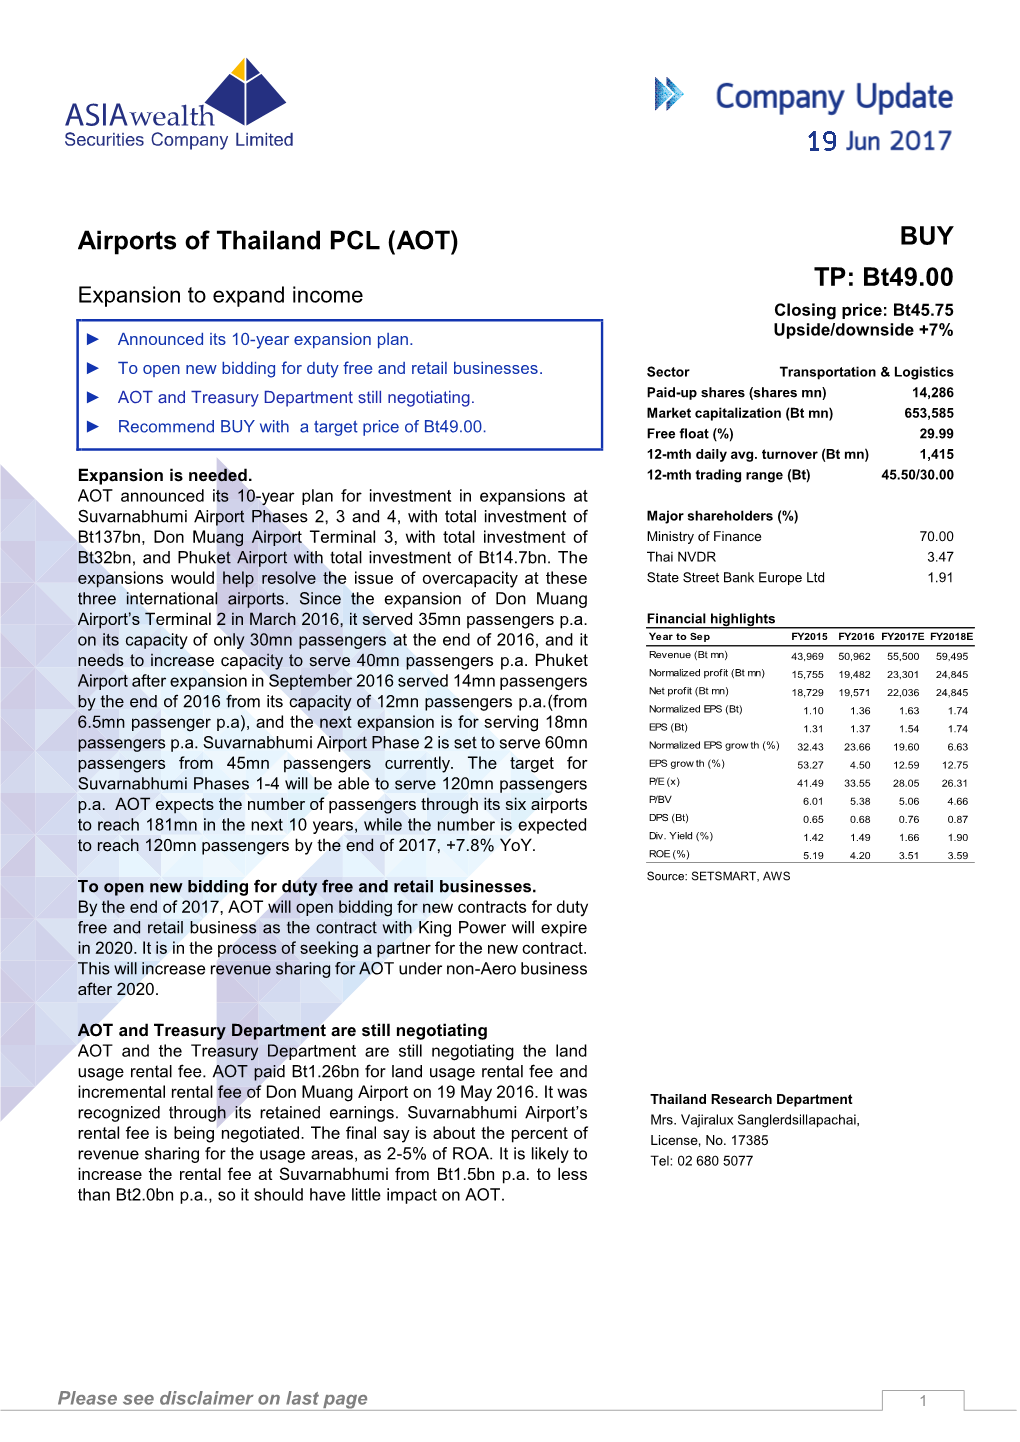 Airports of Thailand PCL (AOT) BUY TP: Bt49.00 Expansion to Expand Income Closing Price: Bt45.75 Upside/Downside +7% ► Announced Its 10-Year Expansion Plan